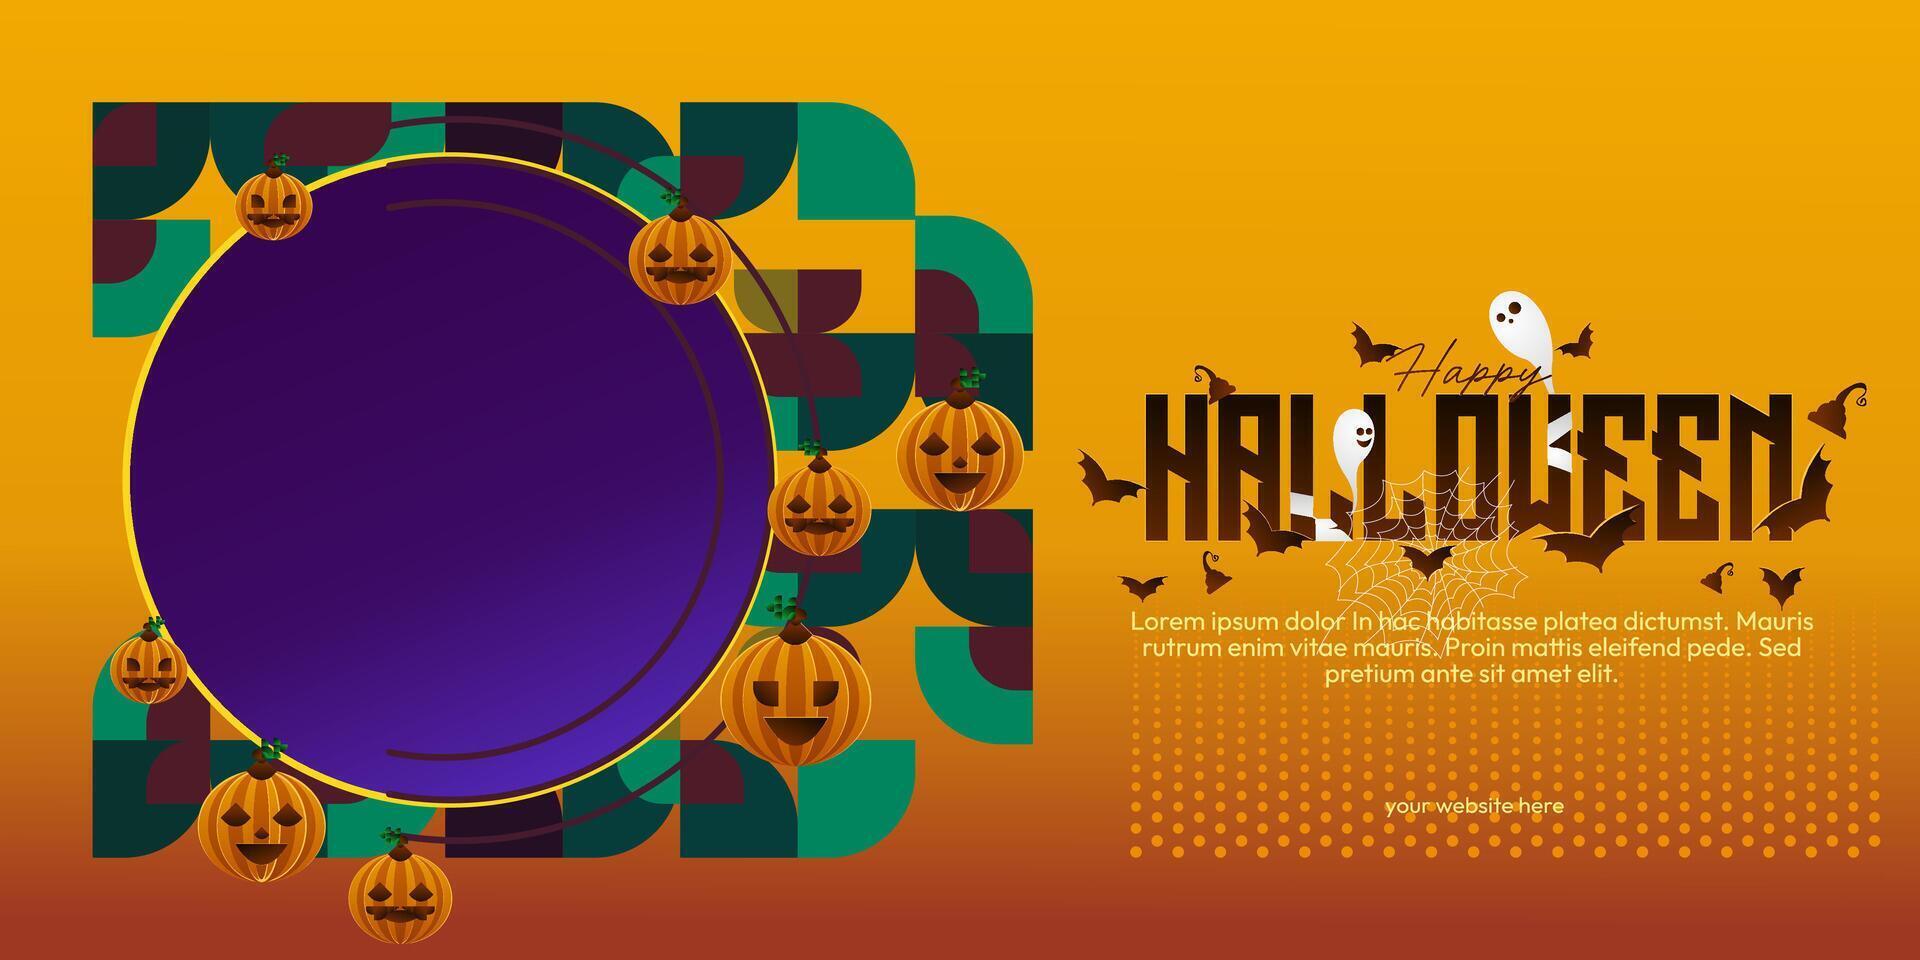 Happy Halloween background in geometric style. Happy halloween cover with pumpkins, spider webs and typography. Suitable for posters, greeting cards and party invitations for Halloween celebrations vector